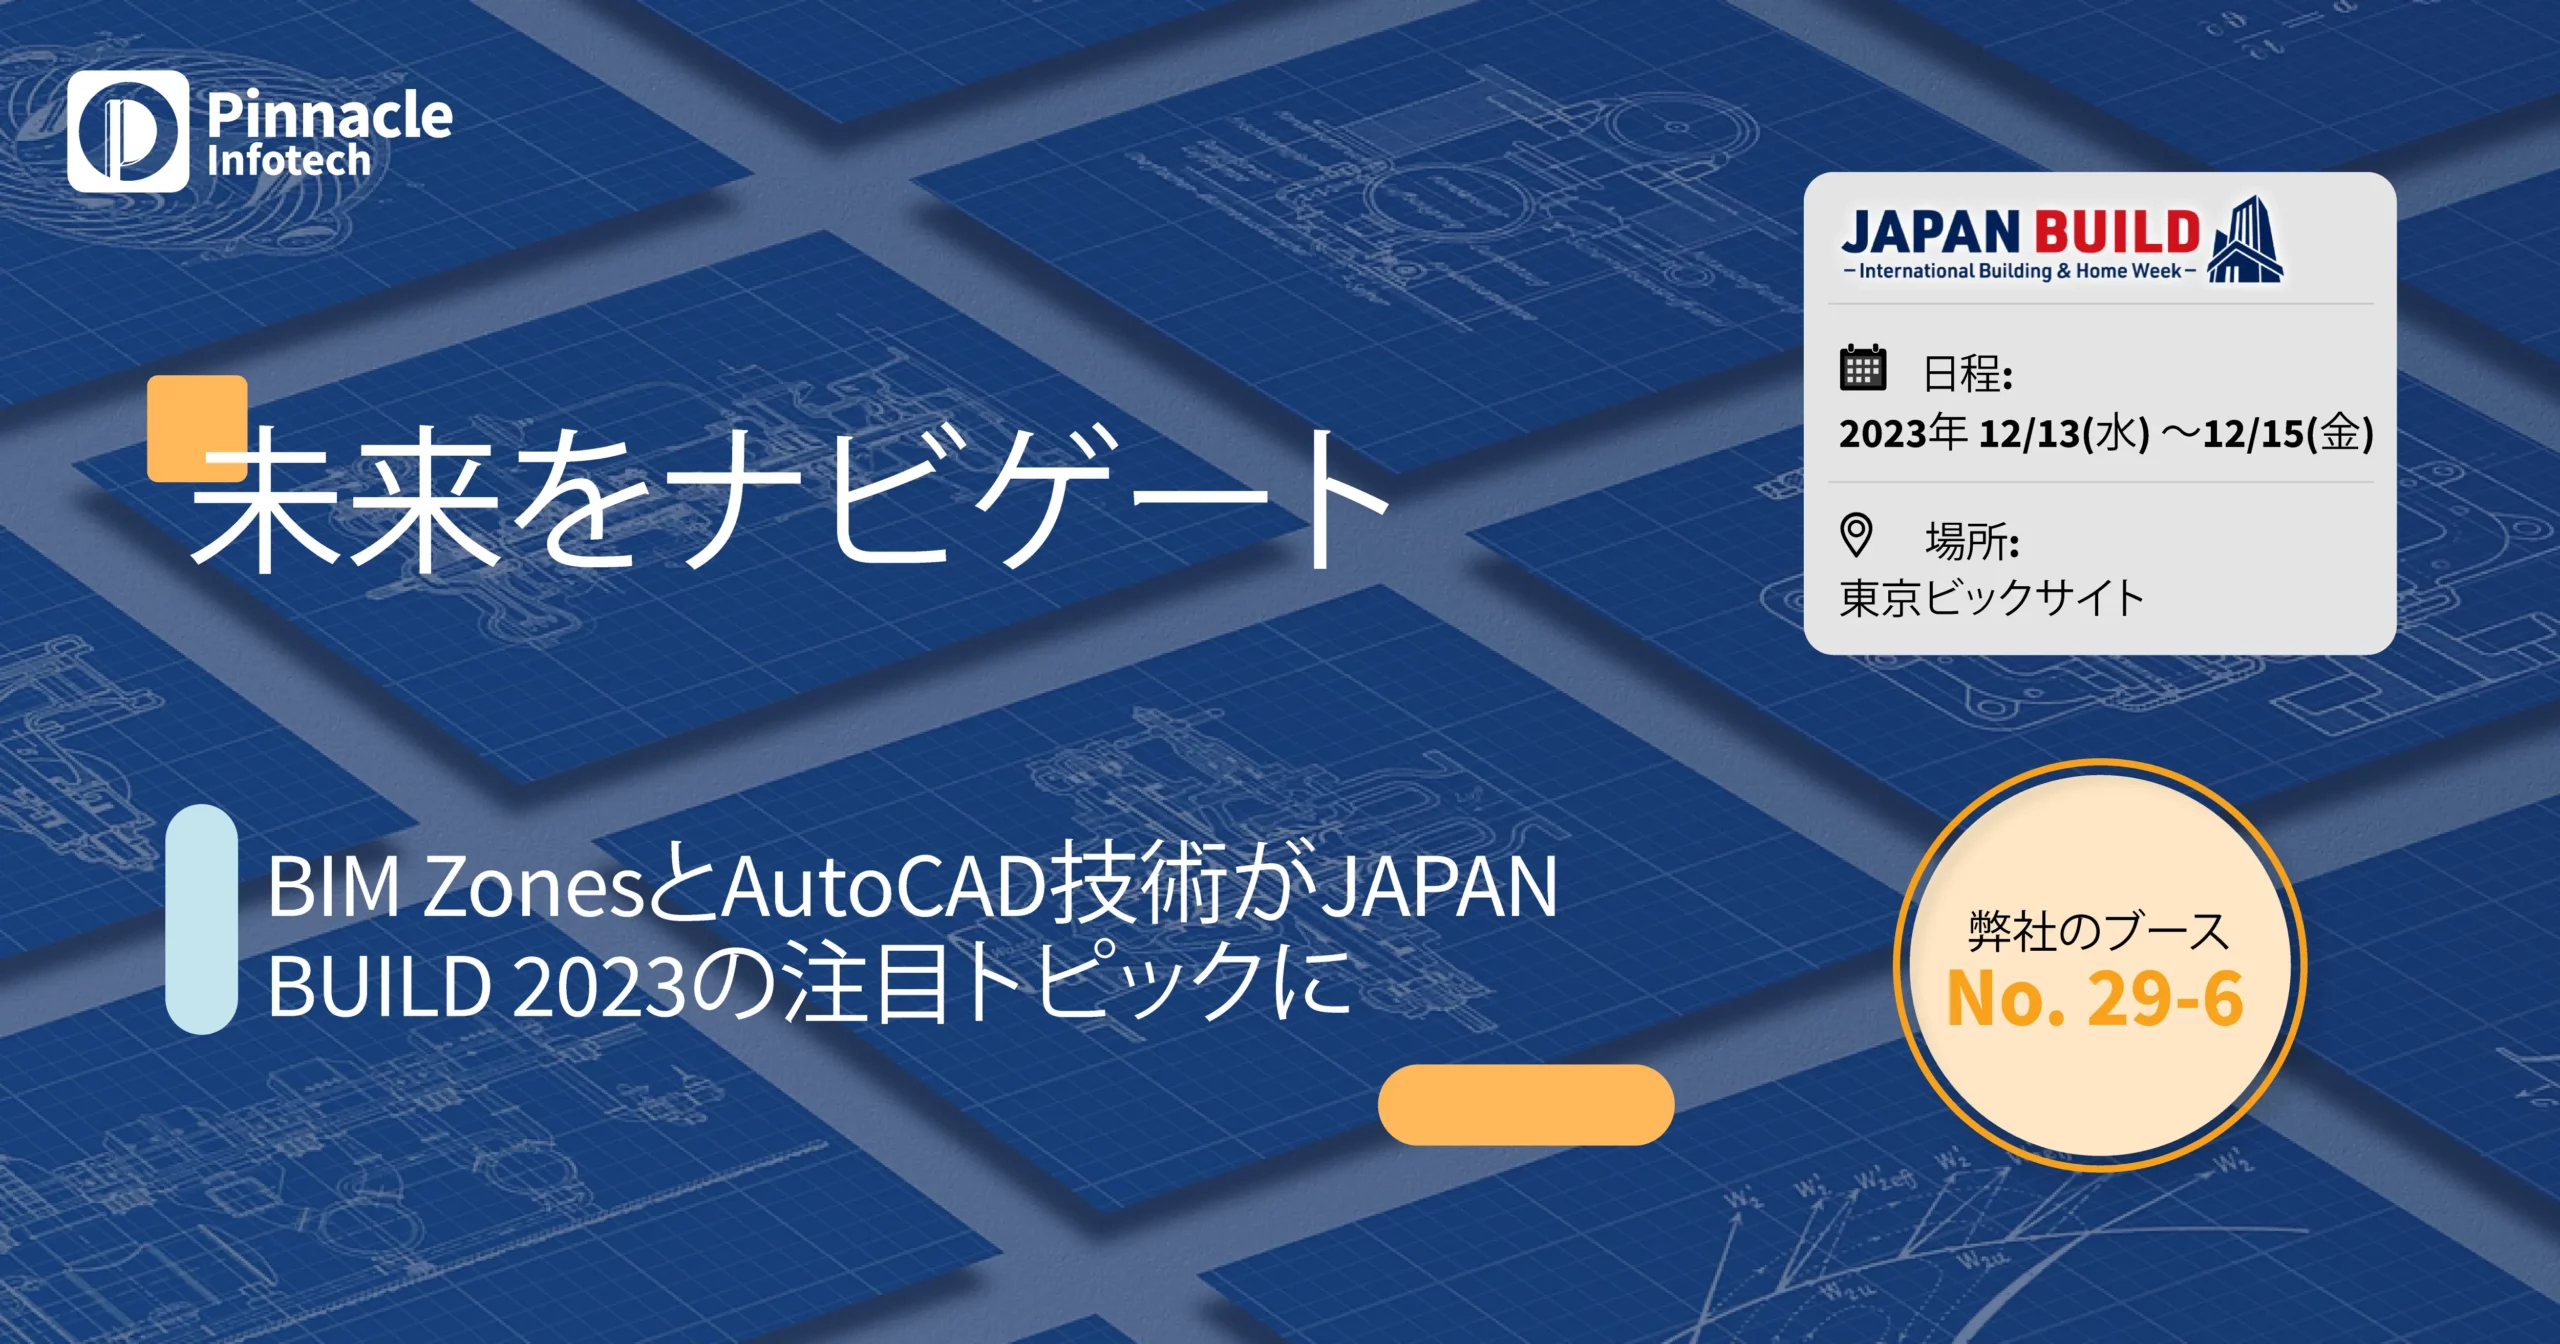 Navigating the Future_ BIM Zones and AutoCAD Technologies Take Center Stage at Japan Build 2023 - Japan Cover